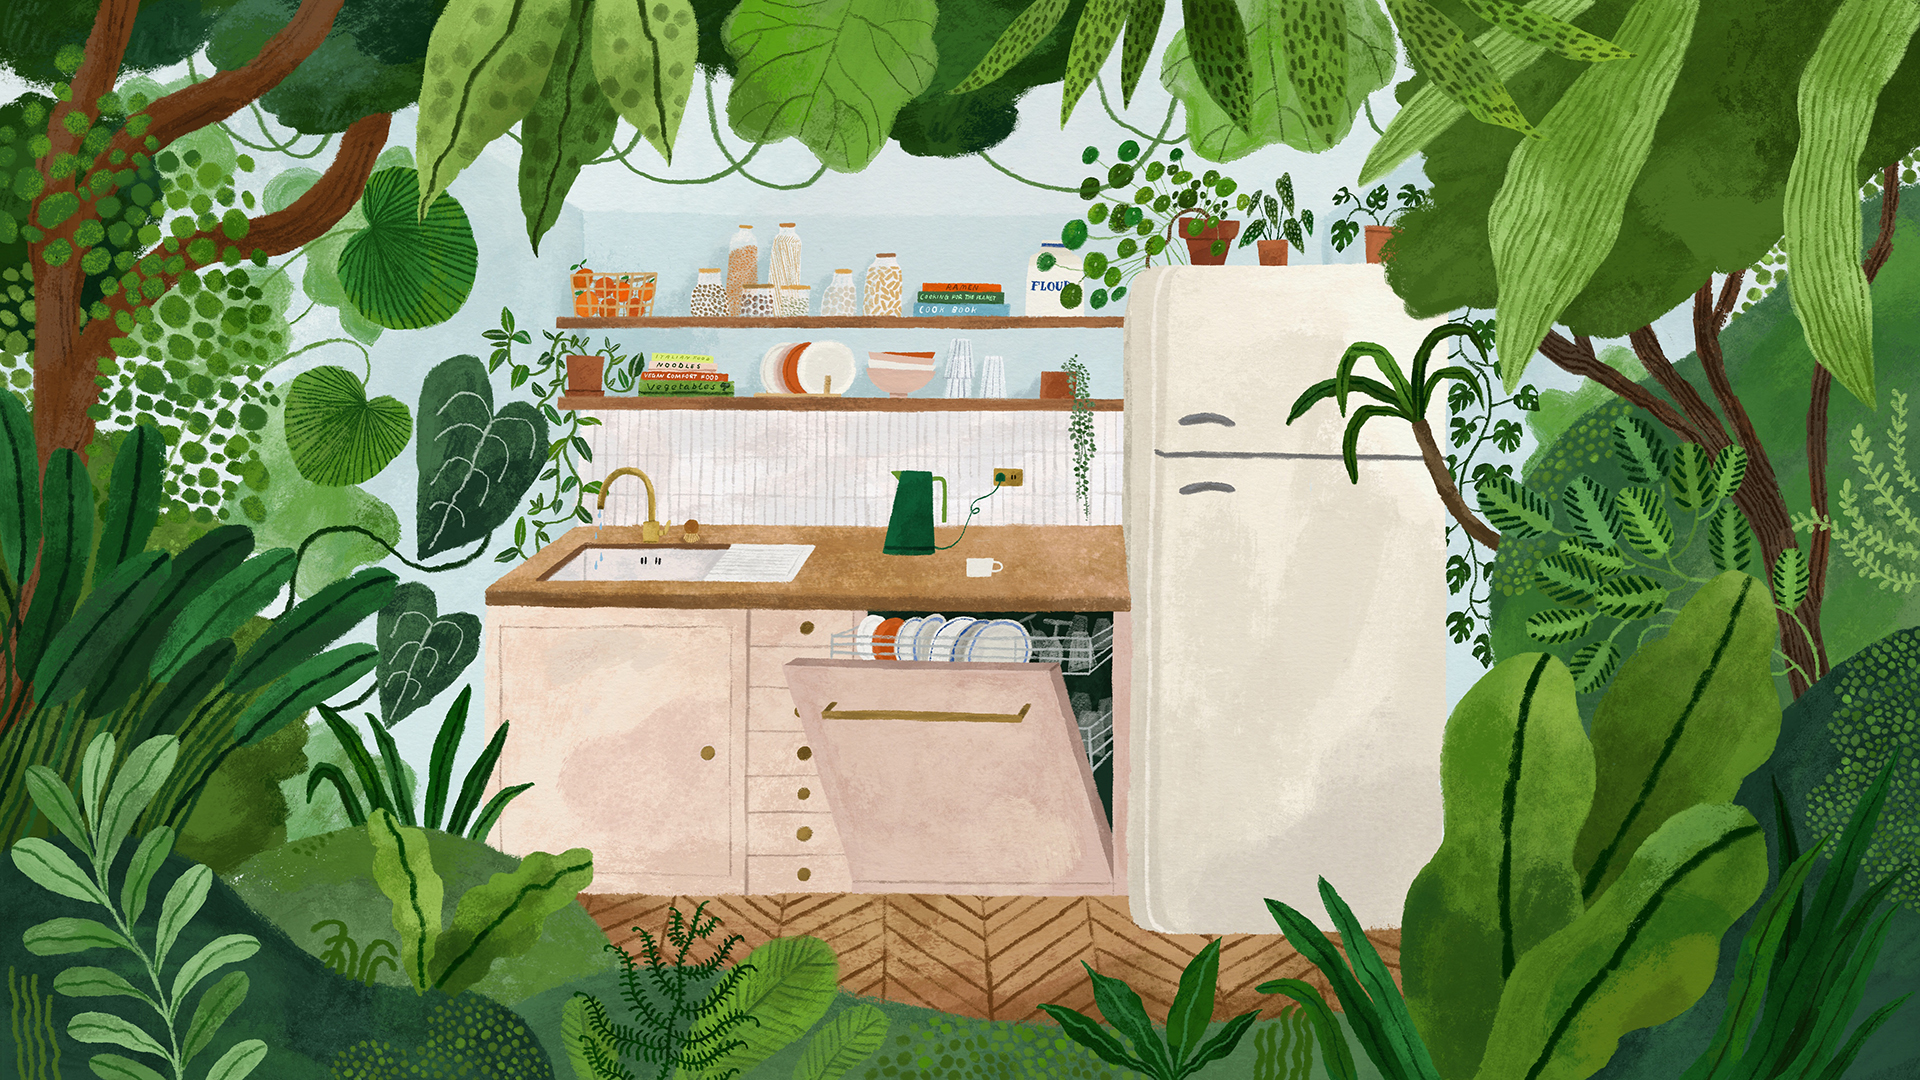 An illustrated kitchen scene with a sink, open dish washer, and refrigerator seen through a frame of lush greenery.